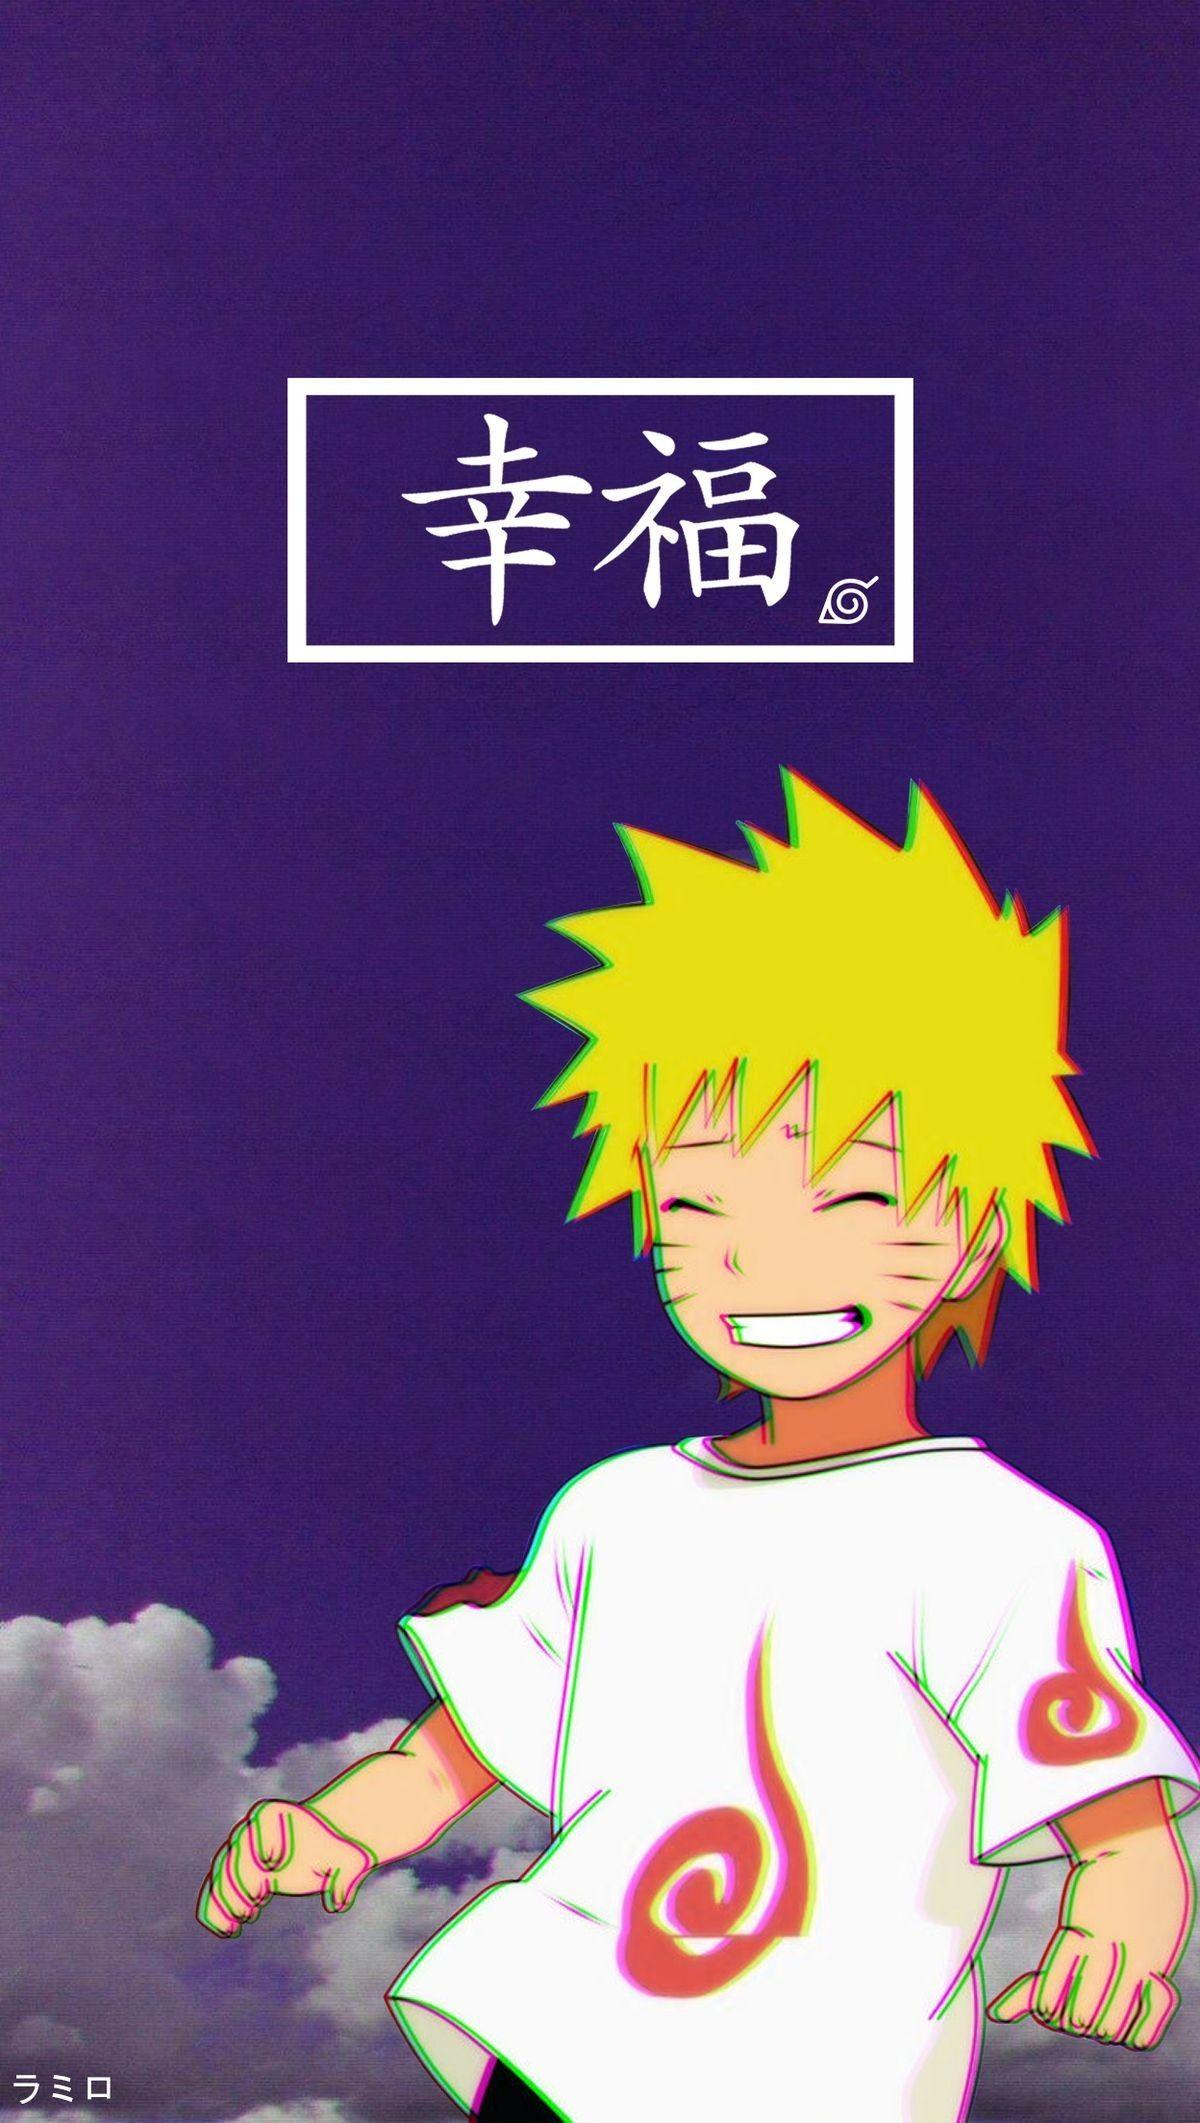 Aesthetic Hd Naruto Wallpapers - Wallpaper Cave